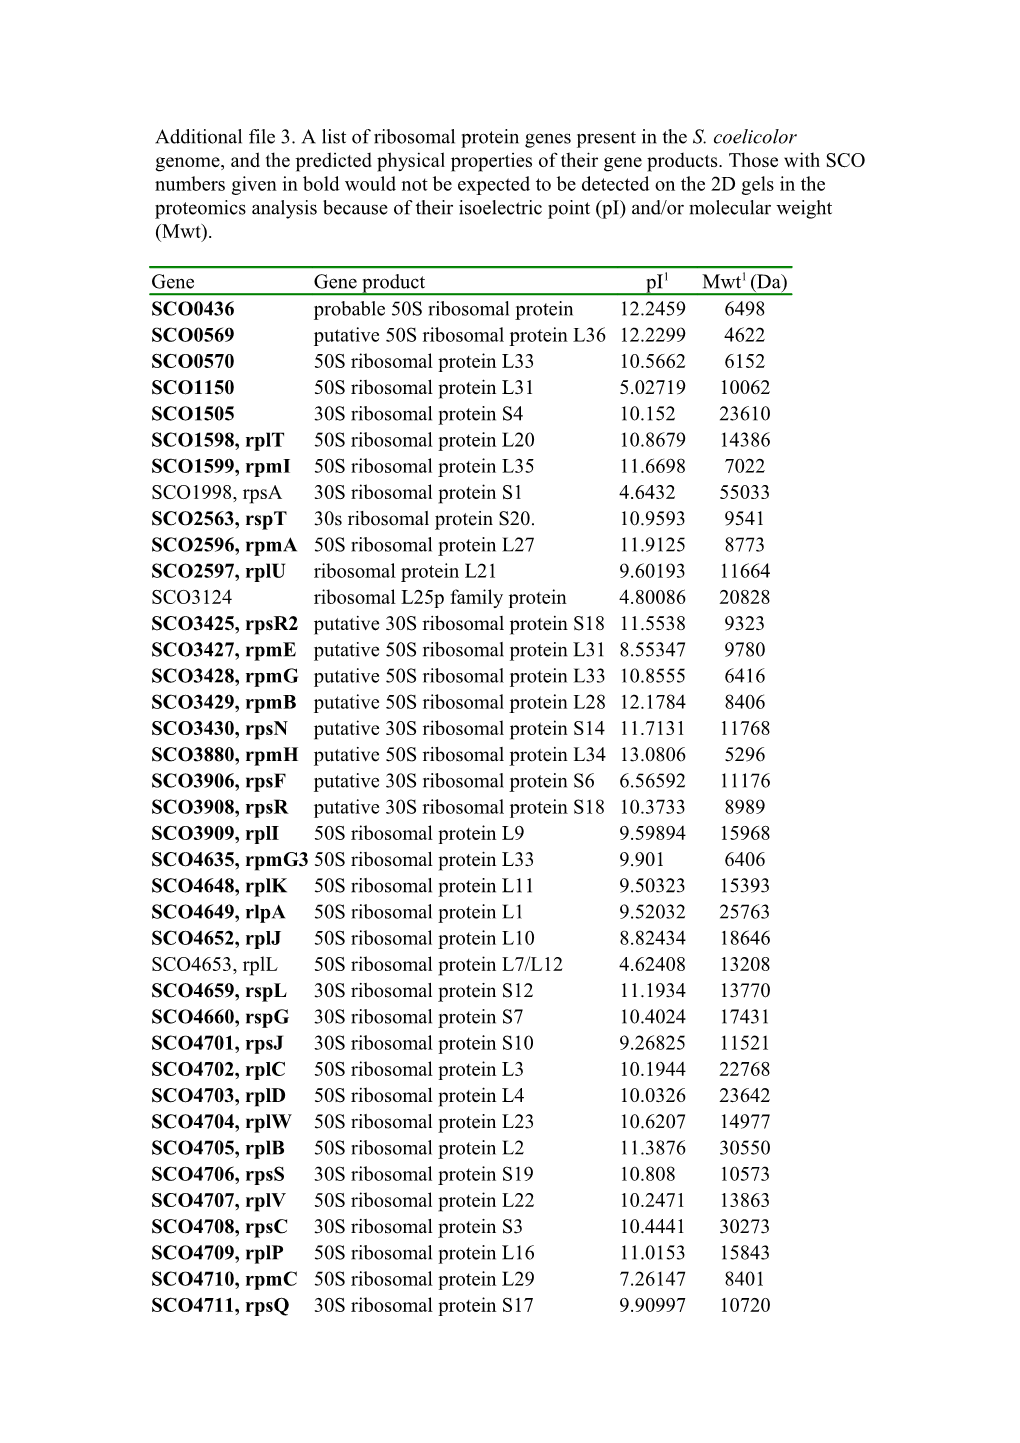 Additional File 3. a List of Ribosomal Protein Genes Present in the S. Coelicolor Genome